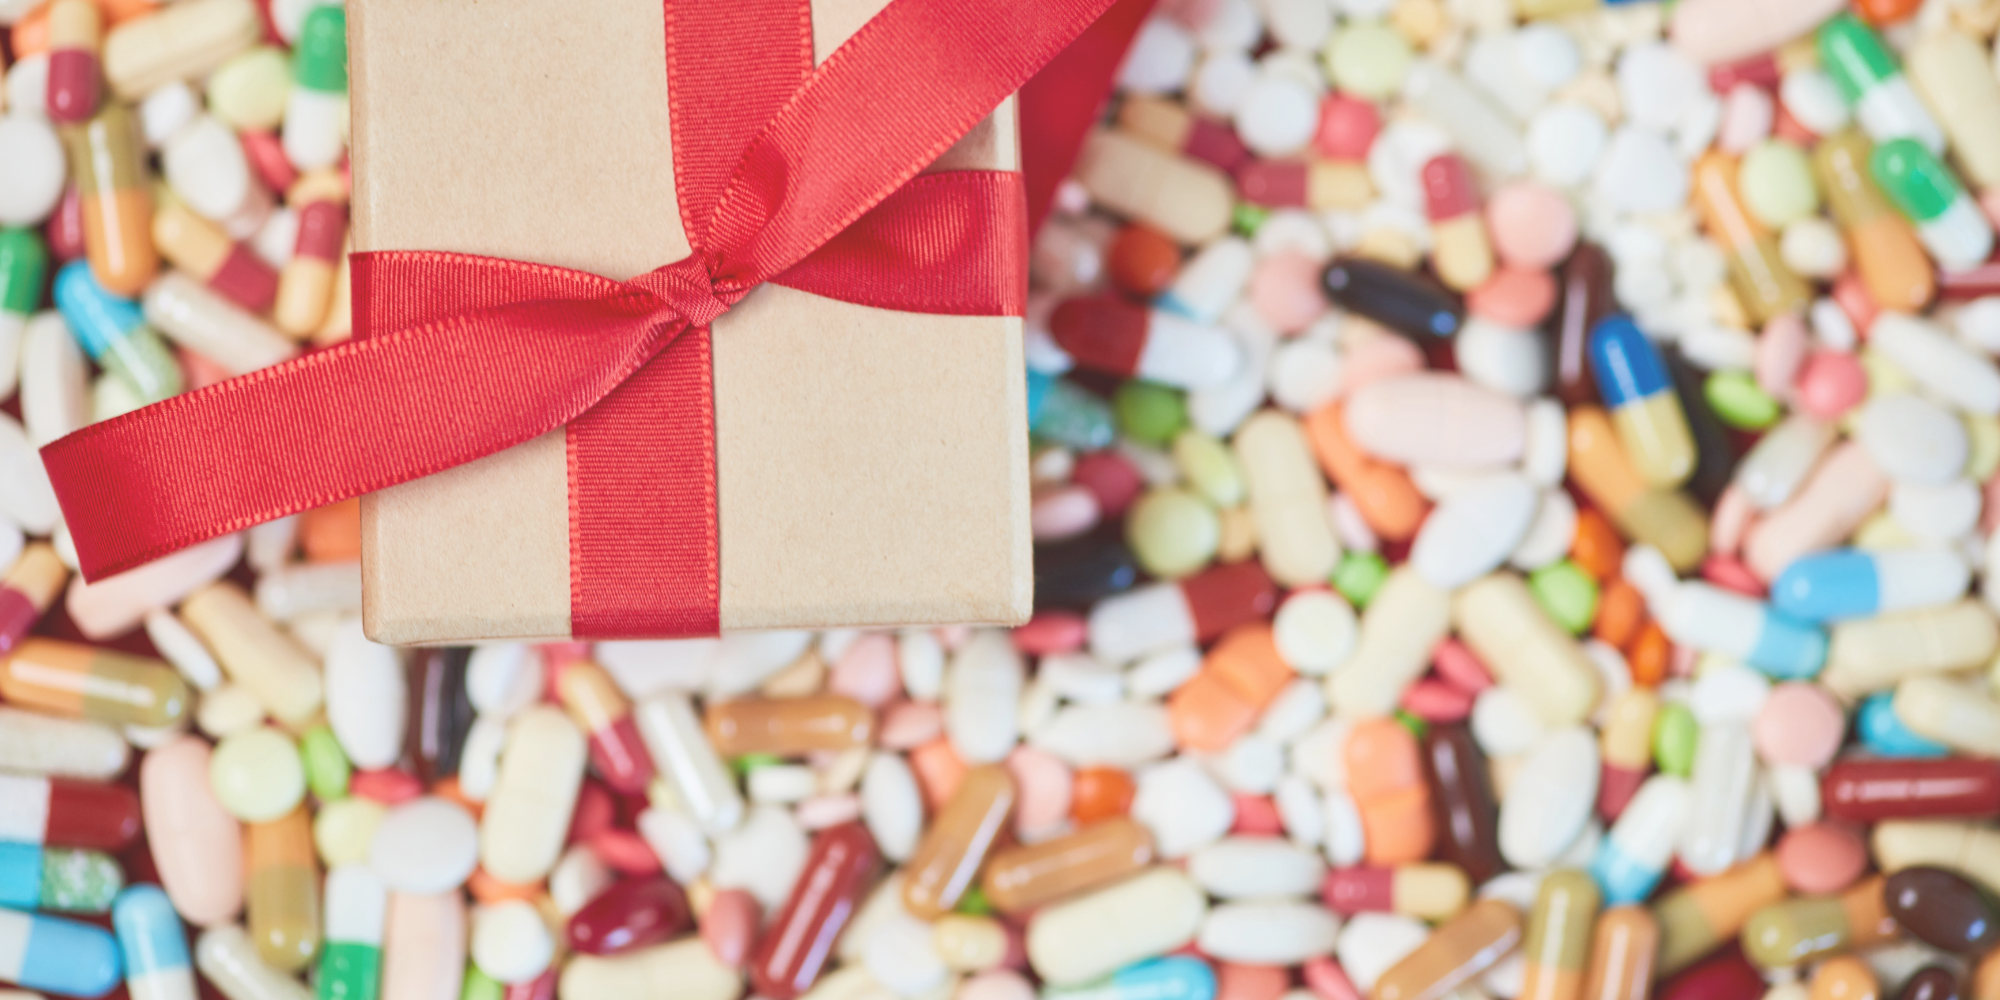 A picture of an unopened gift against a background of pills and medicines.